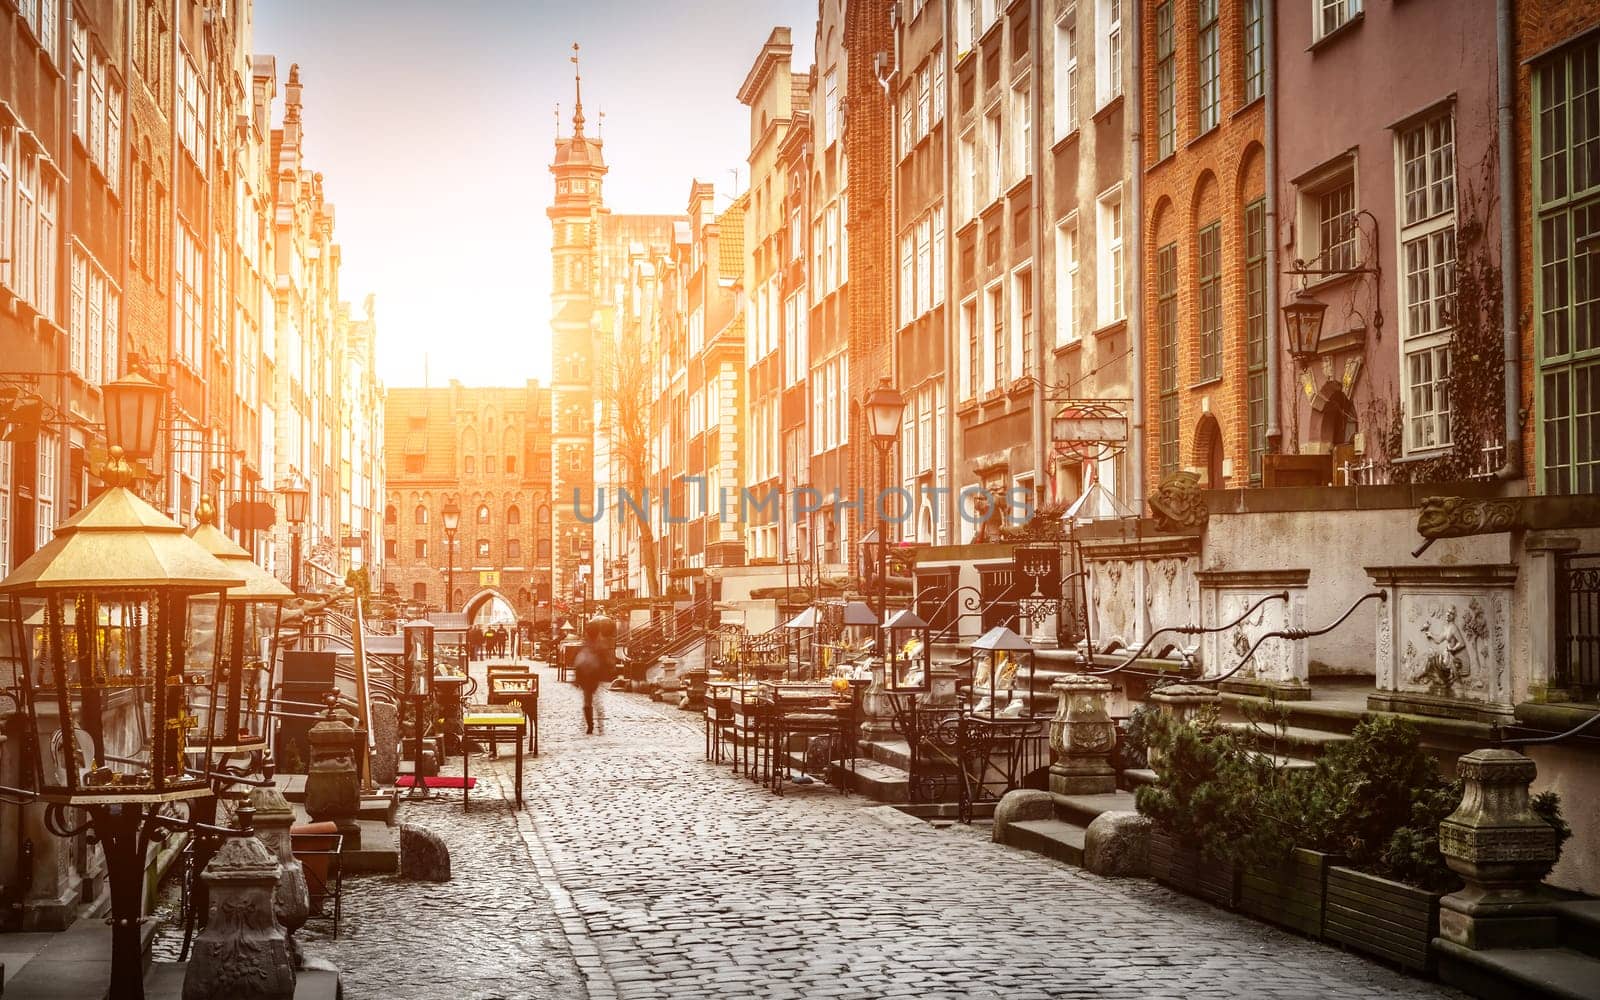 Architecture of Mariacka street in Gdansk is one of the most interesting tourist attractions and sightseeing places in Gdansk at sunset.